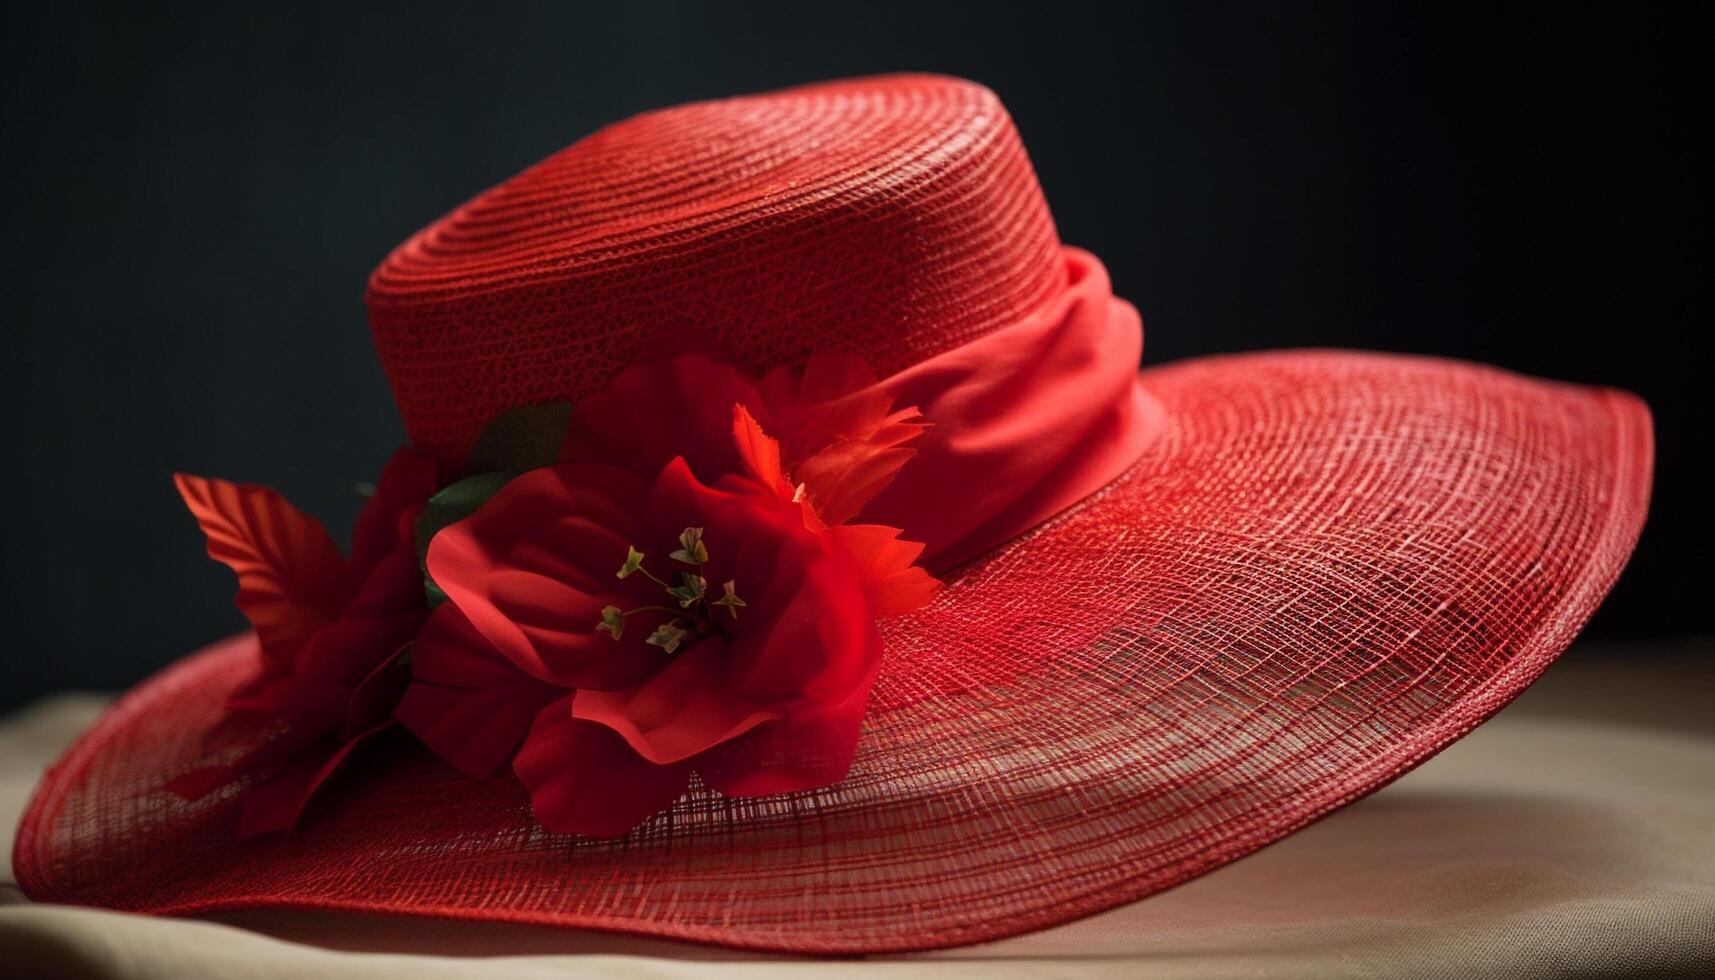 Straw hats and floral garb signify summer generated by AI photo